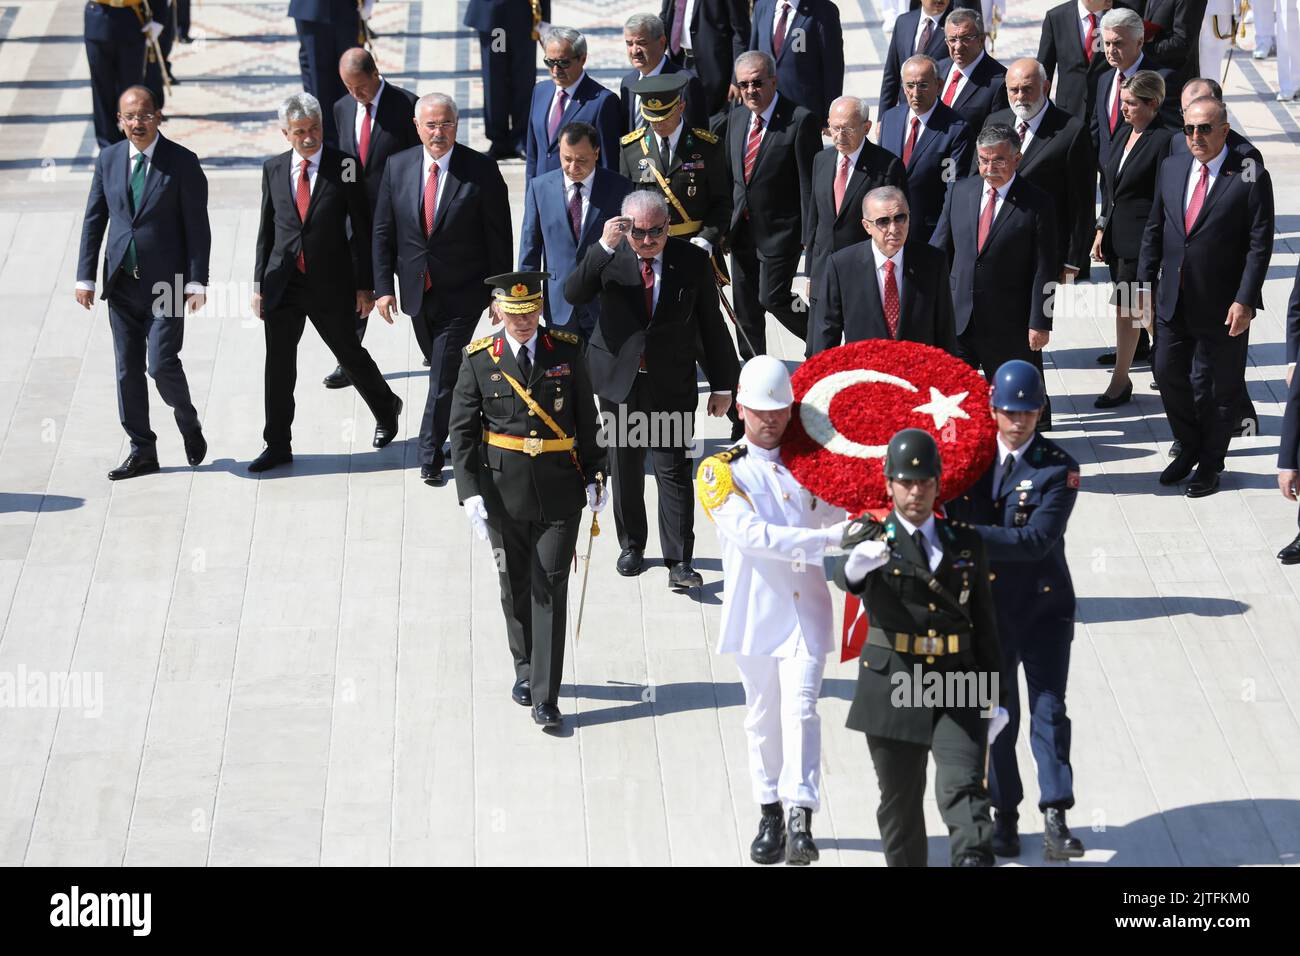 President of the Republic of Turkey, Recep Tayyip Erdo?an and the military and civilian delegation laid a wreath on Atatürk's grave. Victory Day is an official and national holiday celebrated in Turkey and the Turkish Republic of Northern Cyprus every year on 30 August to commemorate the Great Offensive, which ended in victory in Dumlup?nar under the command of Atatürk on August 30, 1922. On the anniversary of the victory, President of the Republic of Turkey Recep Tayyip Erdo?an and the public visited the mausoleum where Atatürk's grave is located. (Photo by Tunahan Turhan/SOPA IMAGES/Sipa USA Stock Photo